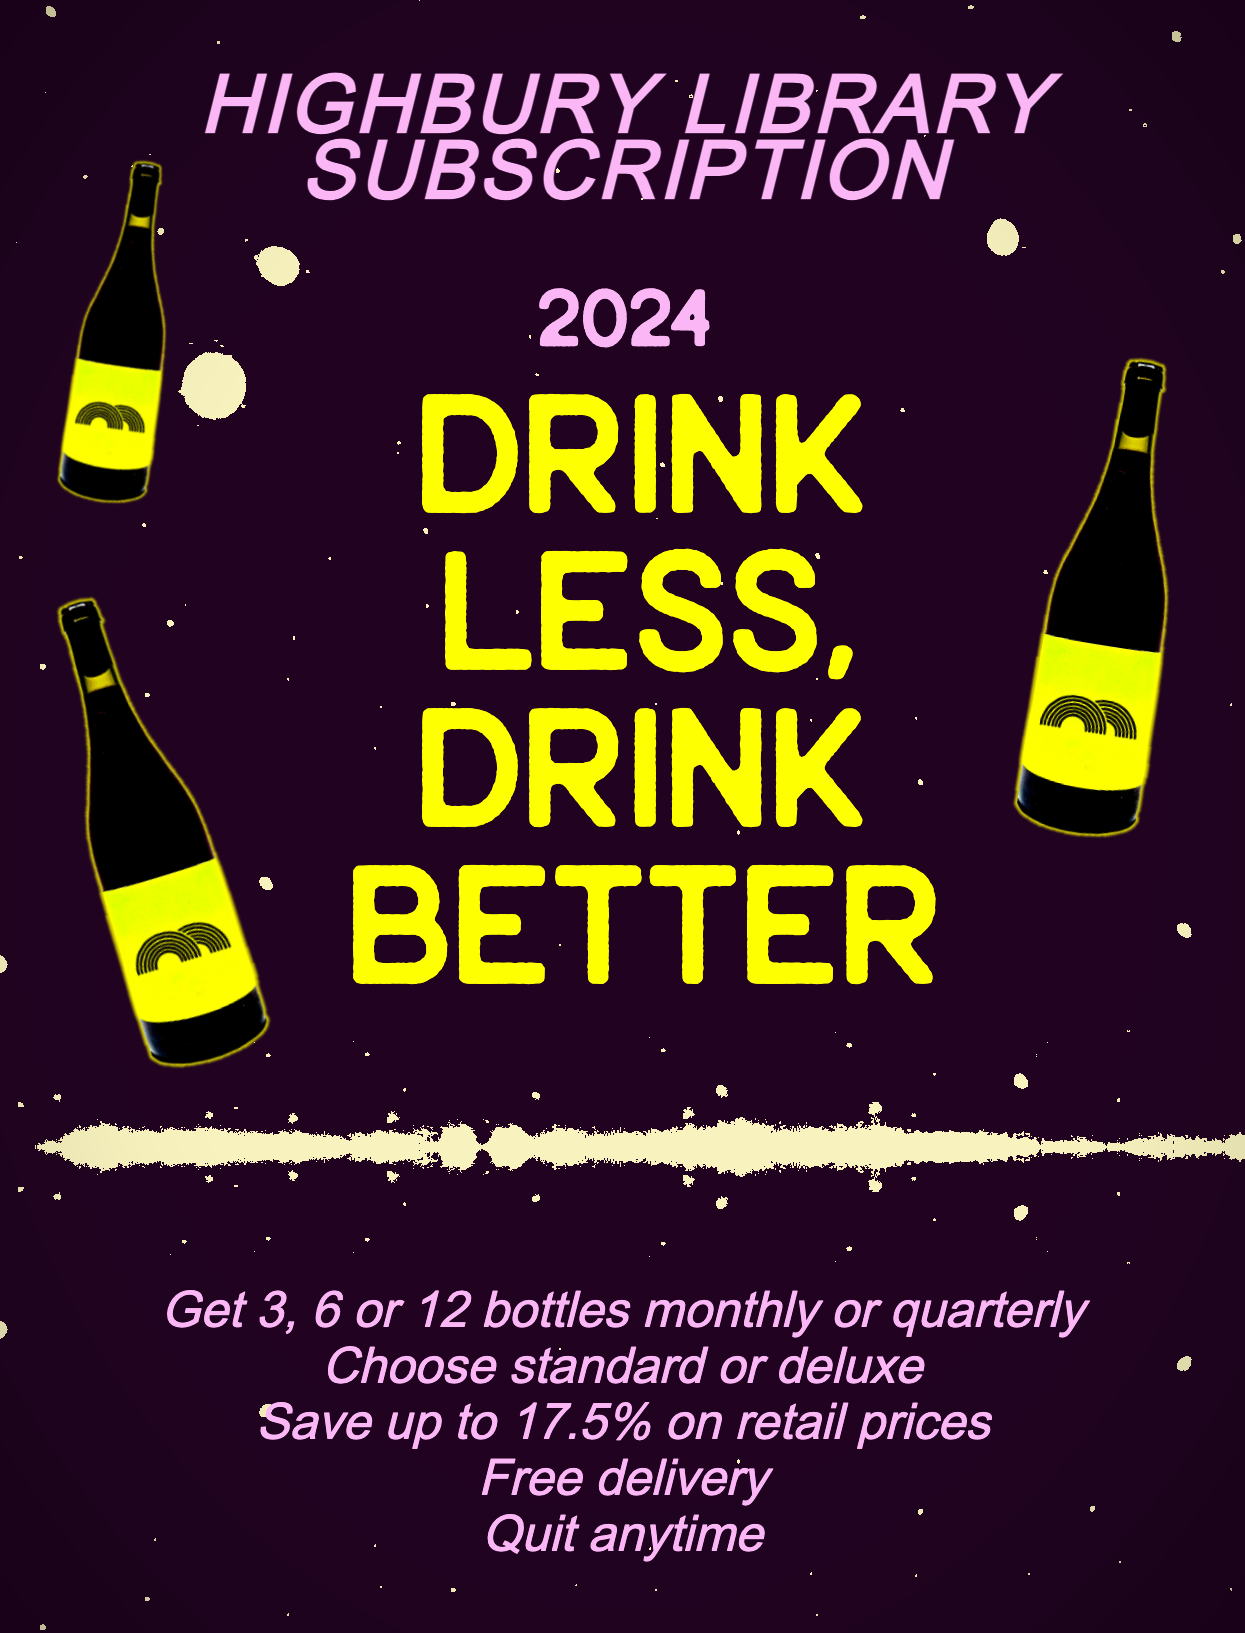 2024 is all about mindful drinking